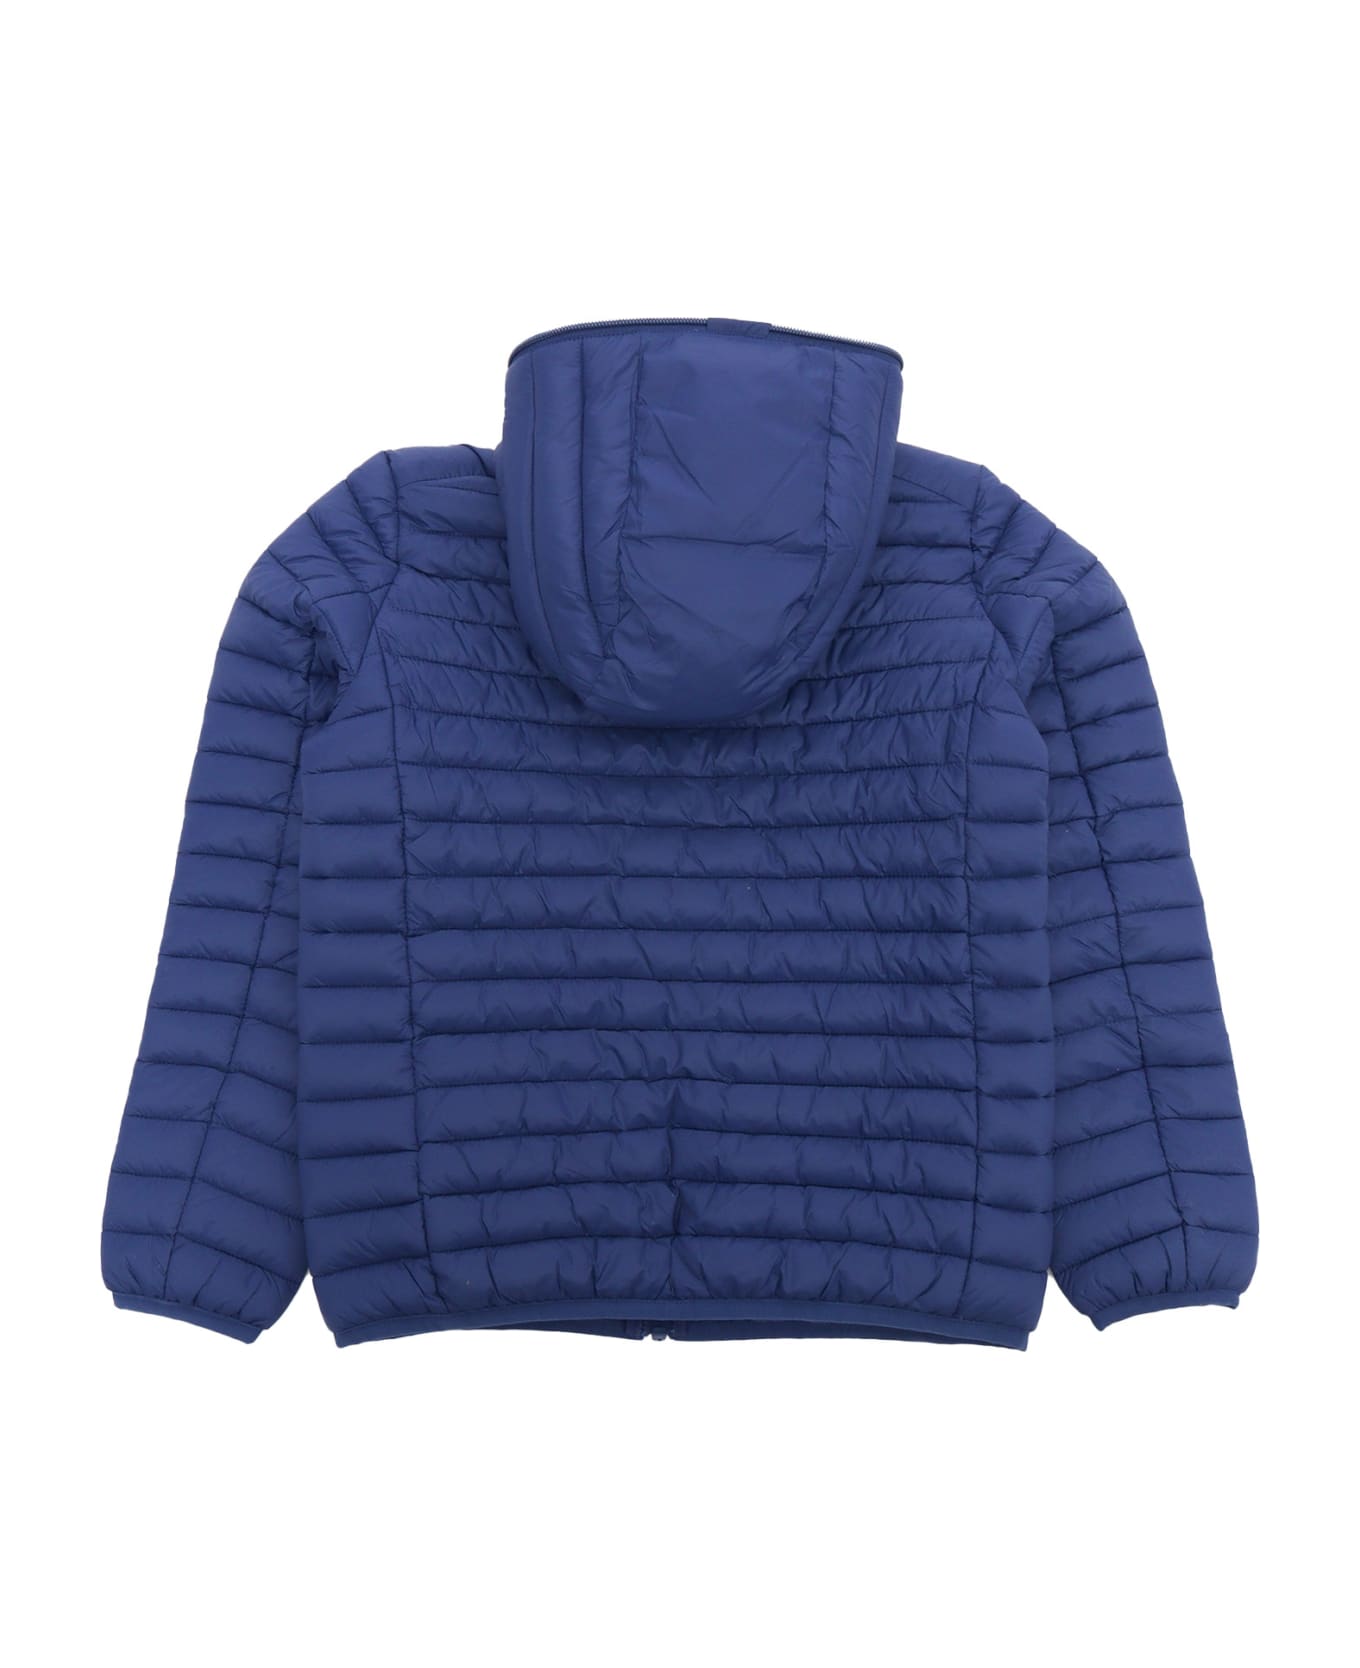 Save the Duck Child's Hooded Down Jacket - BLUE